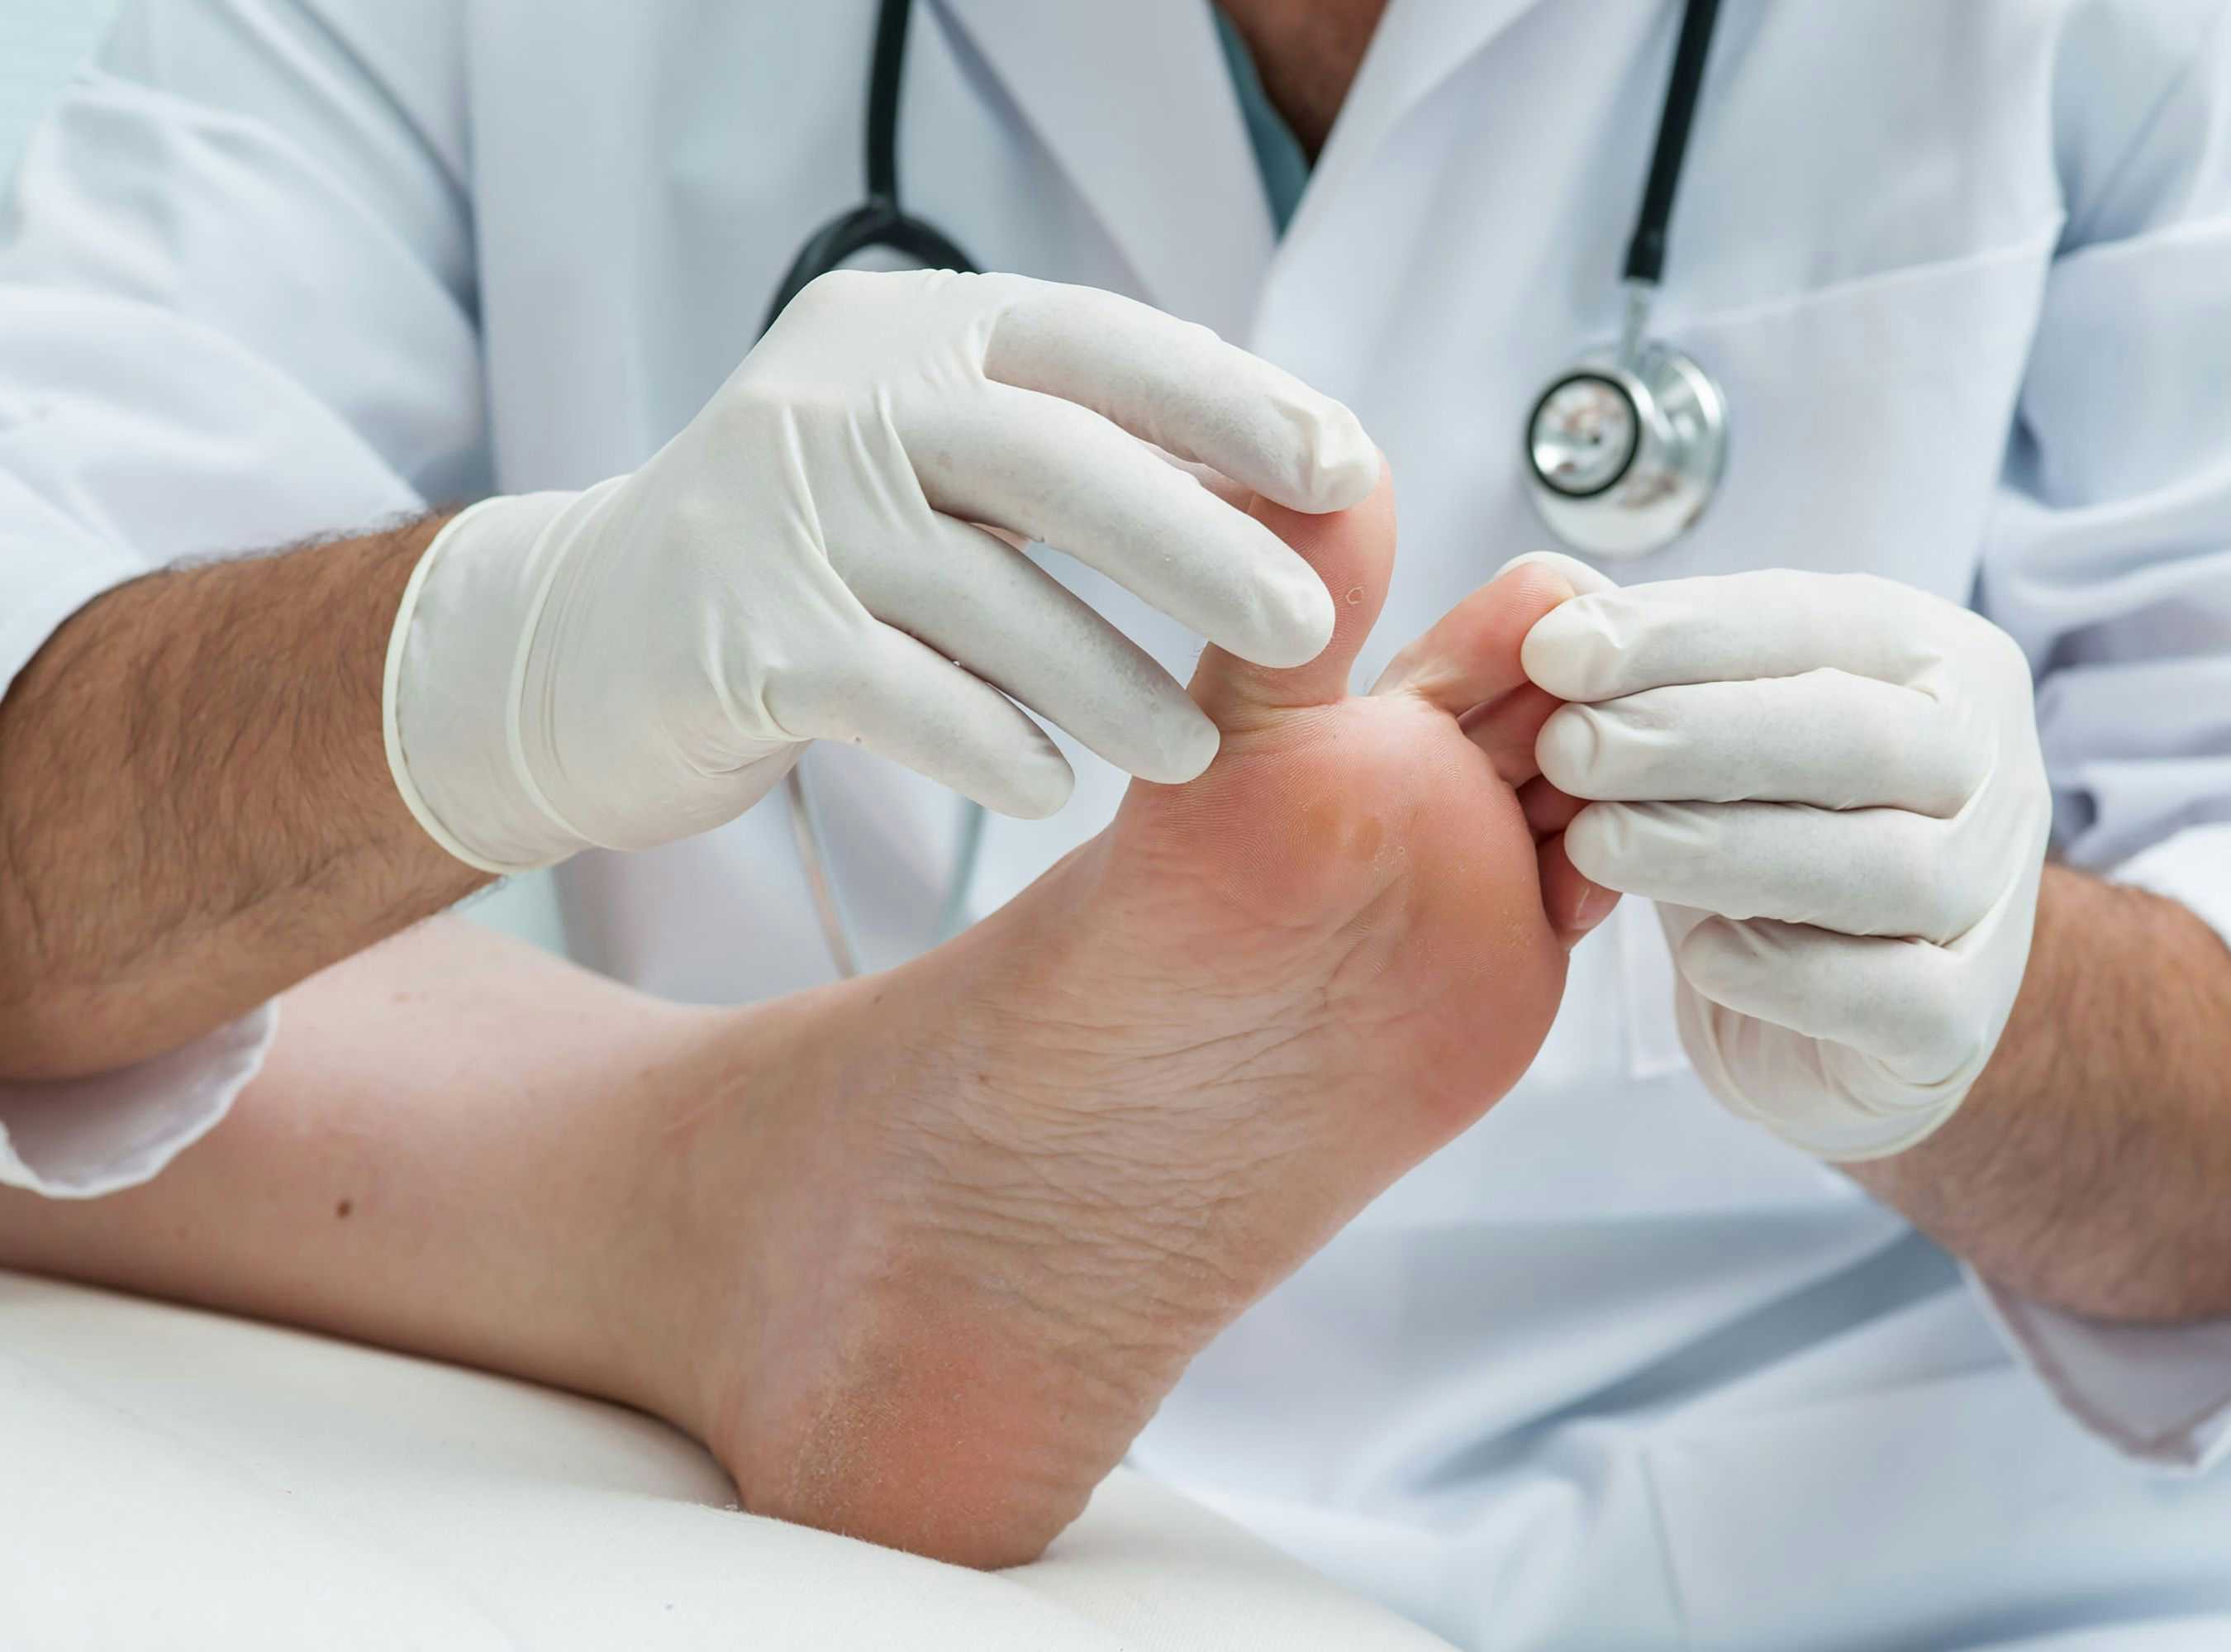 Podiatry Expert Assessment Excluded for Failing to Satisfy But-For Causation